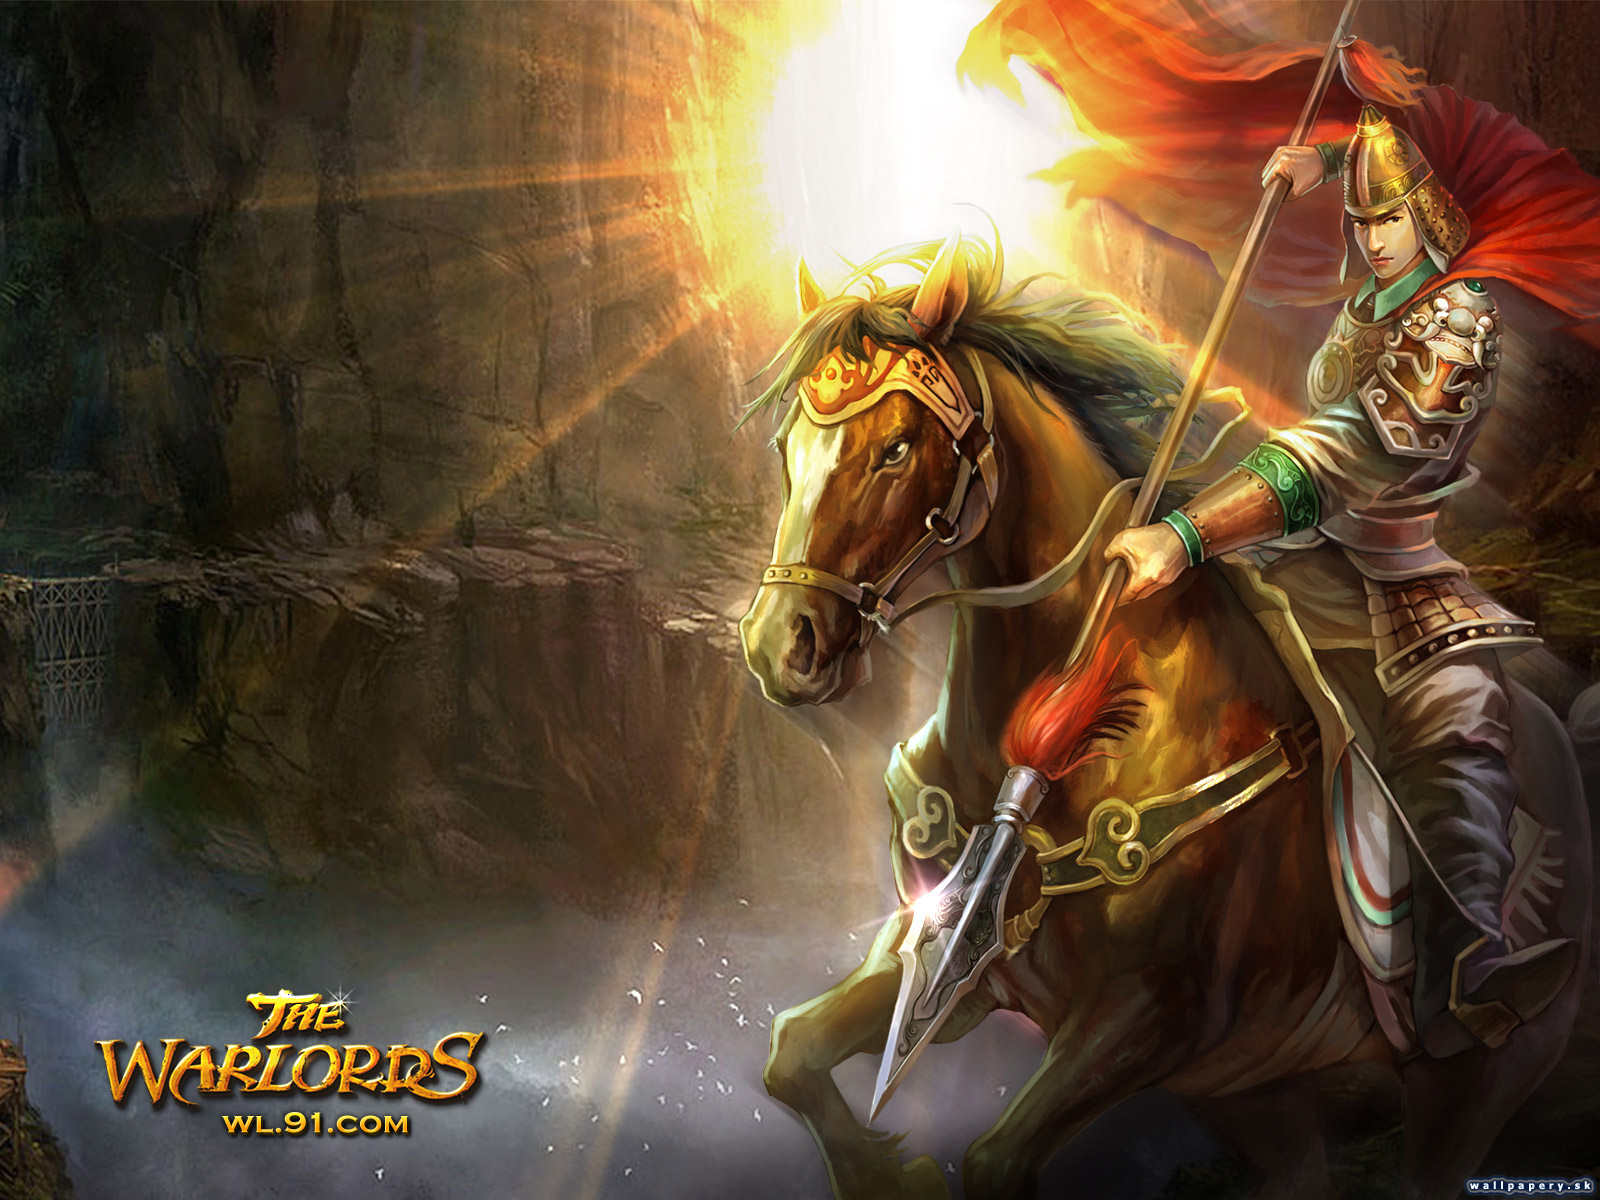 The Warlords - wallpaper 21